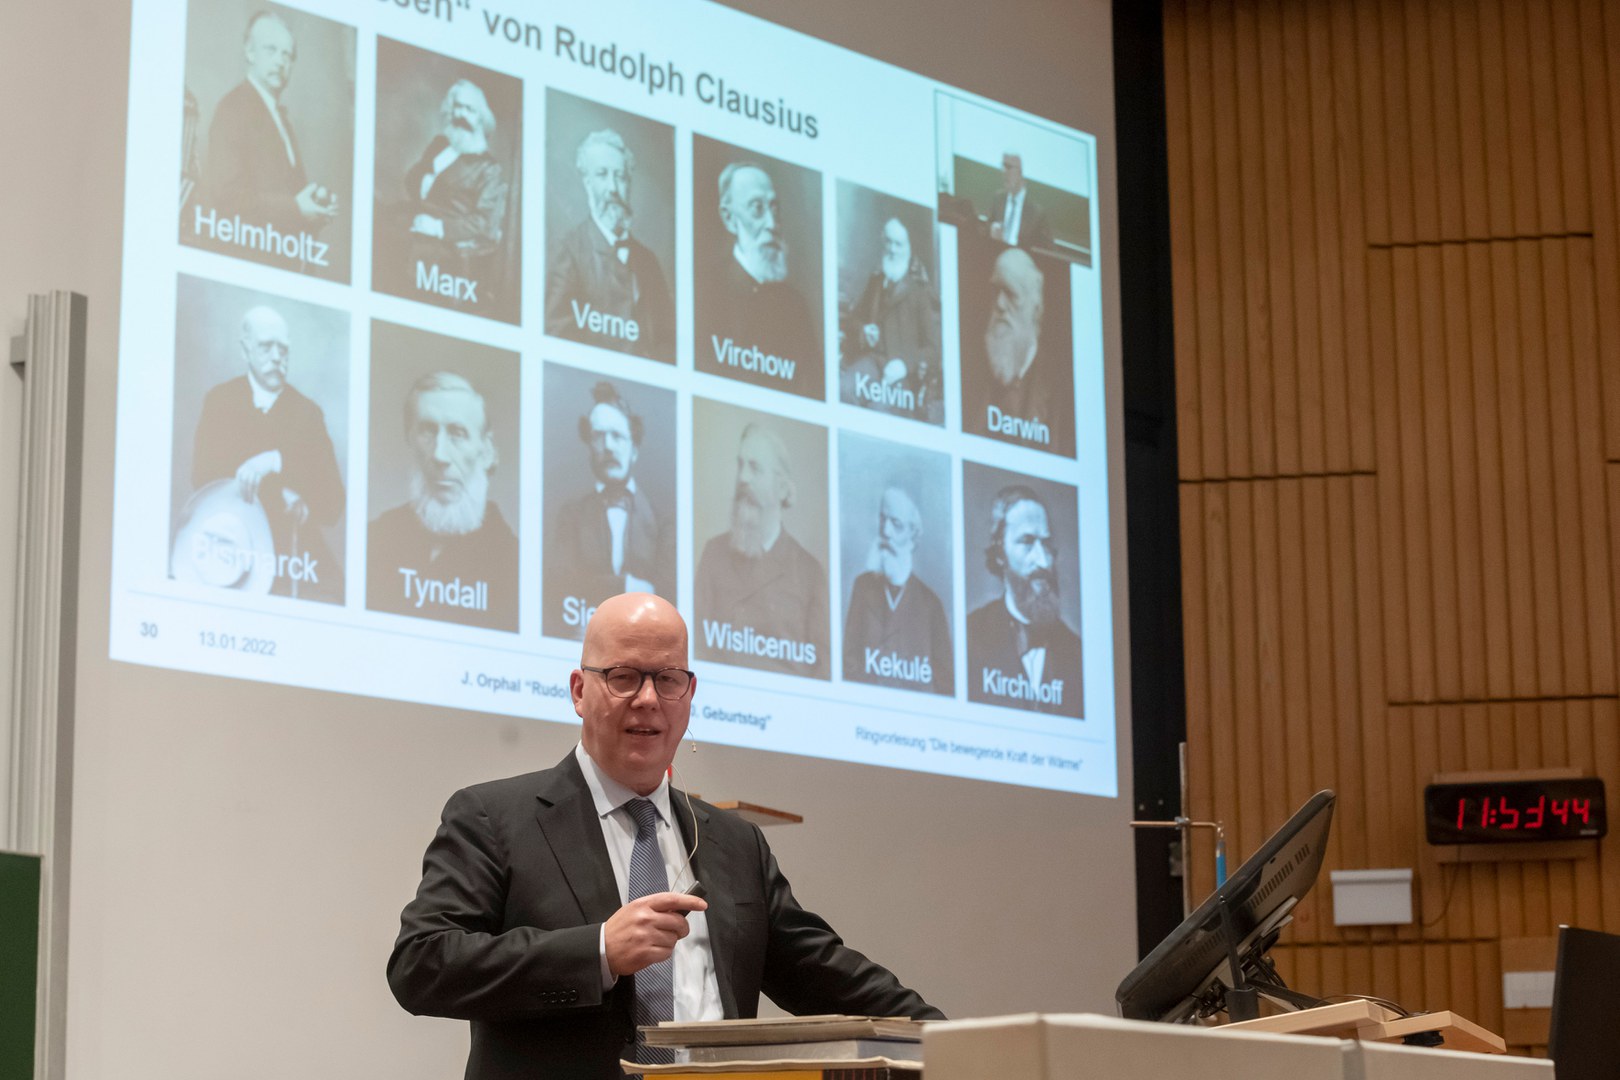 In his talk Professor Orphal demonstrated a wealth of knowledge about the contemporaries of Rudolf Clausius and the times they lived in.